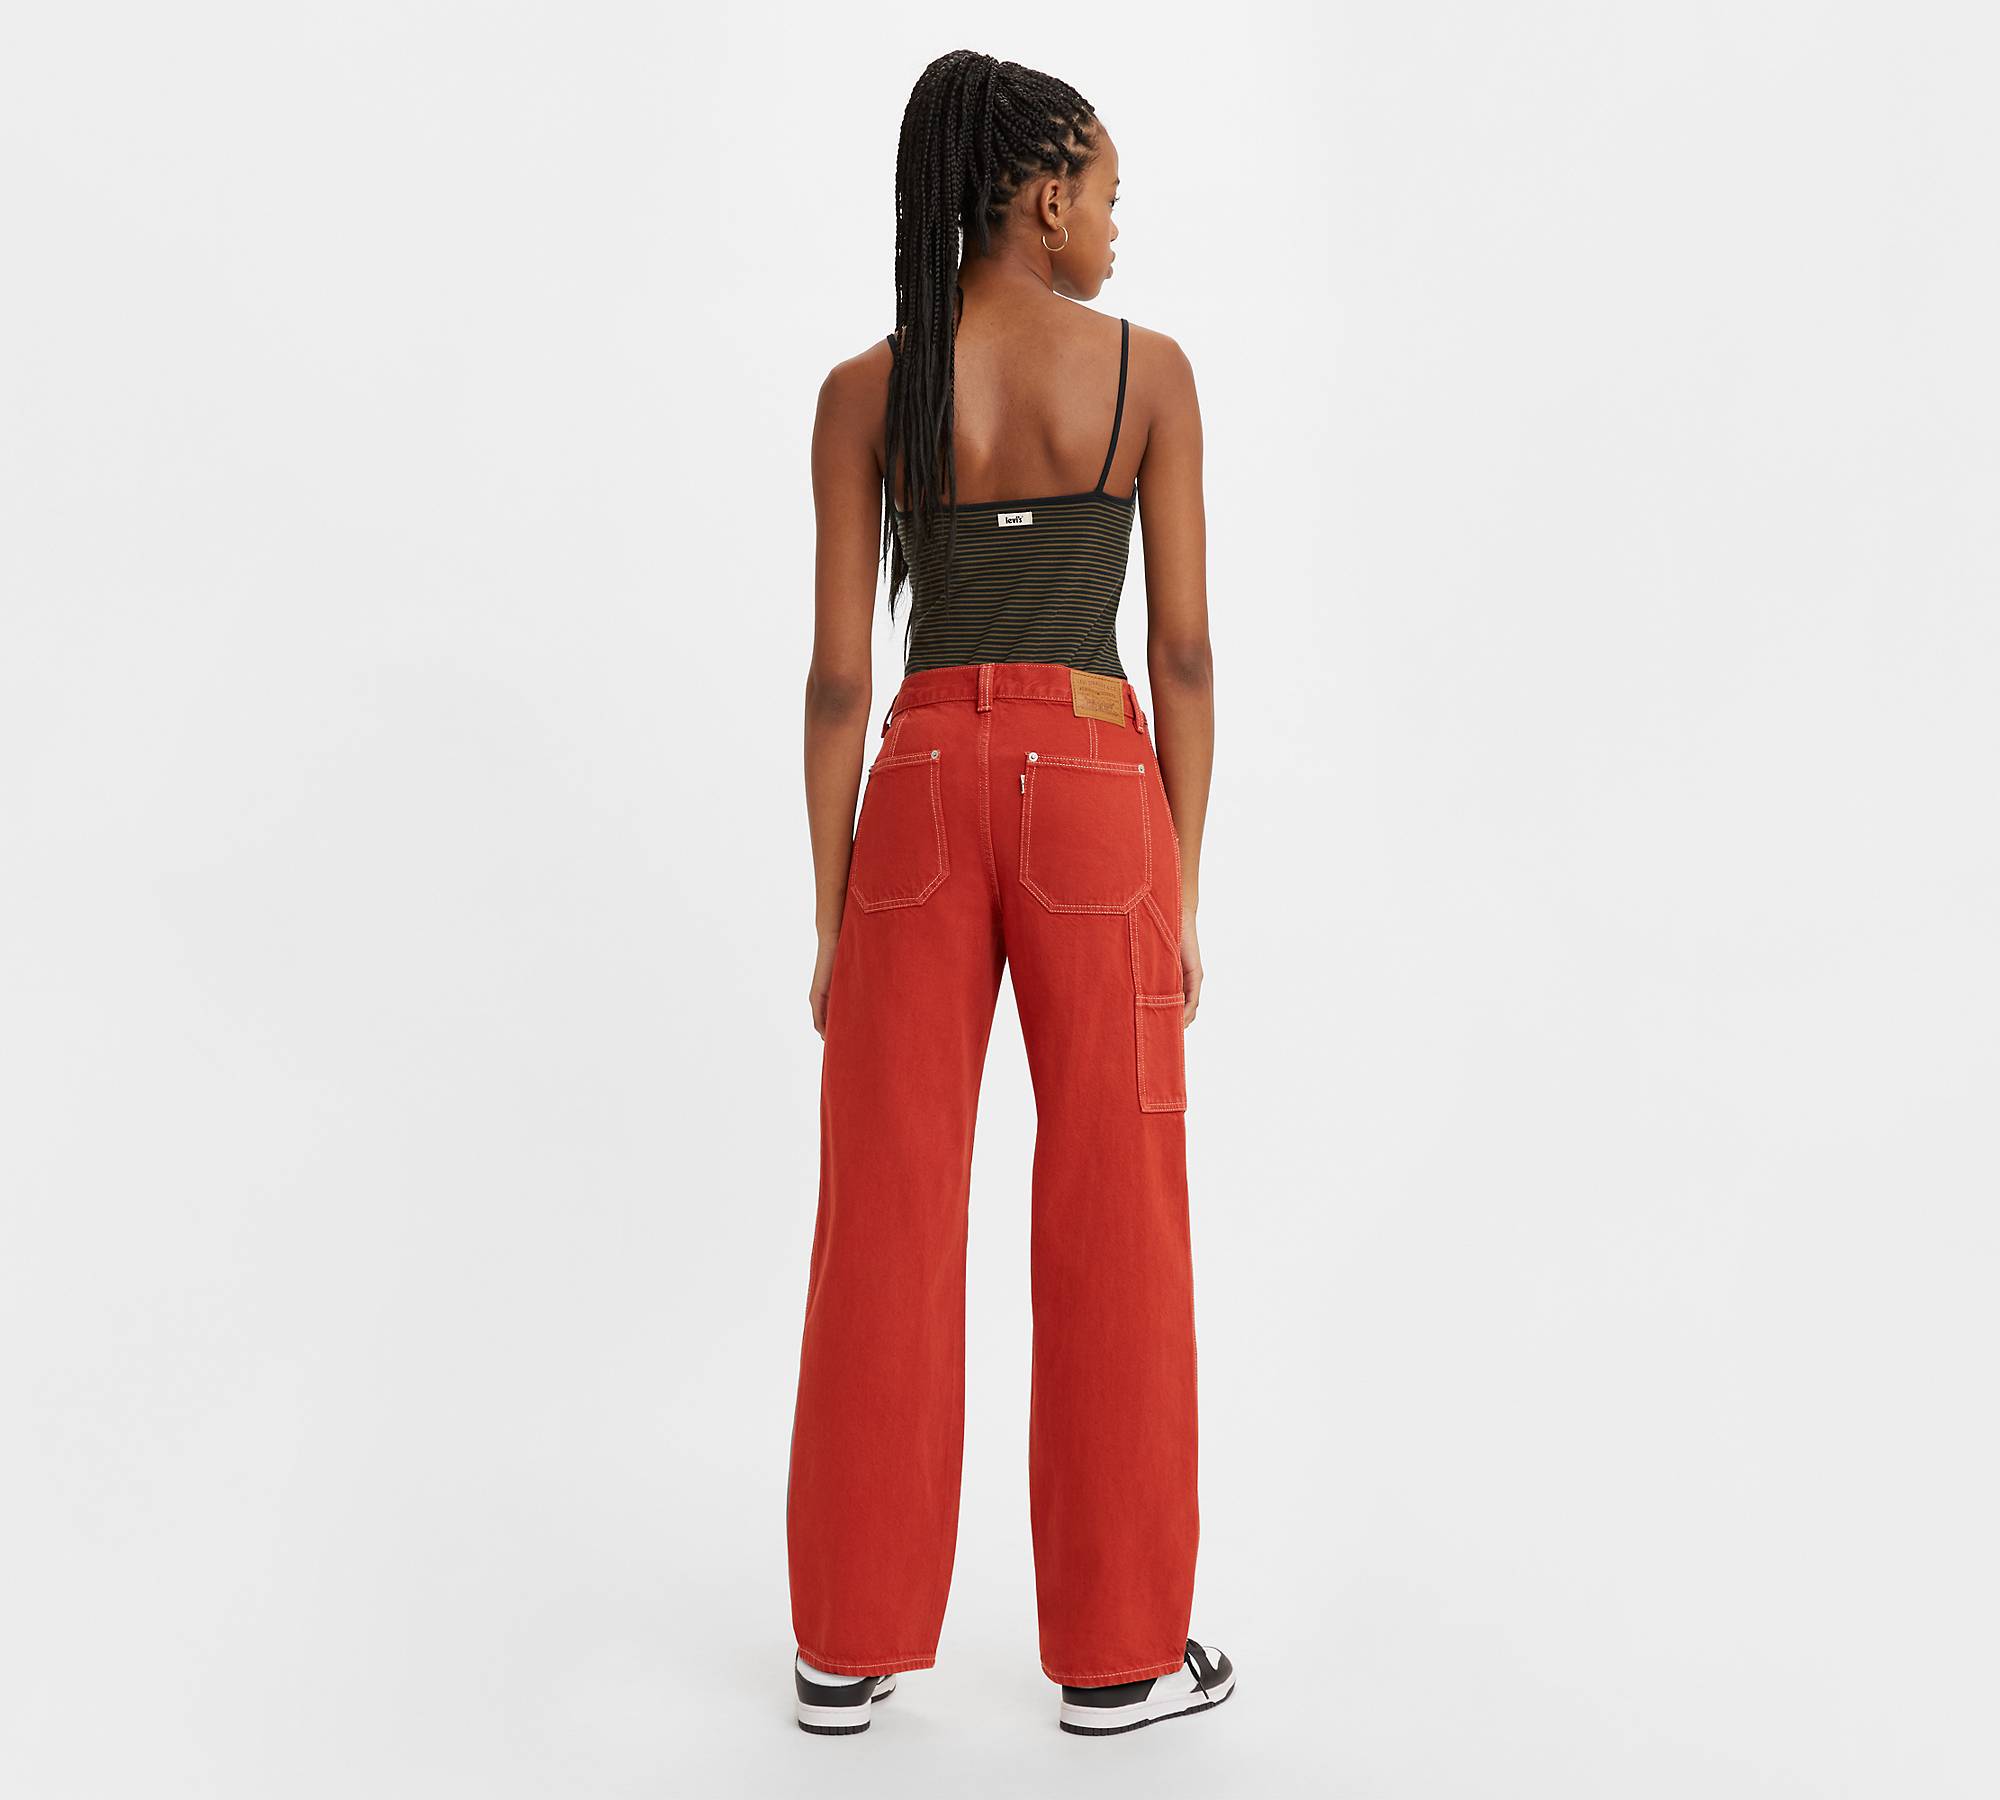 Red stitched wide leg trousers